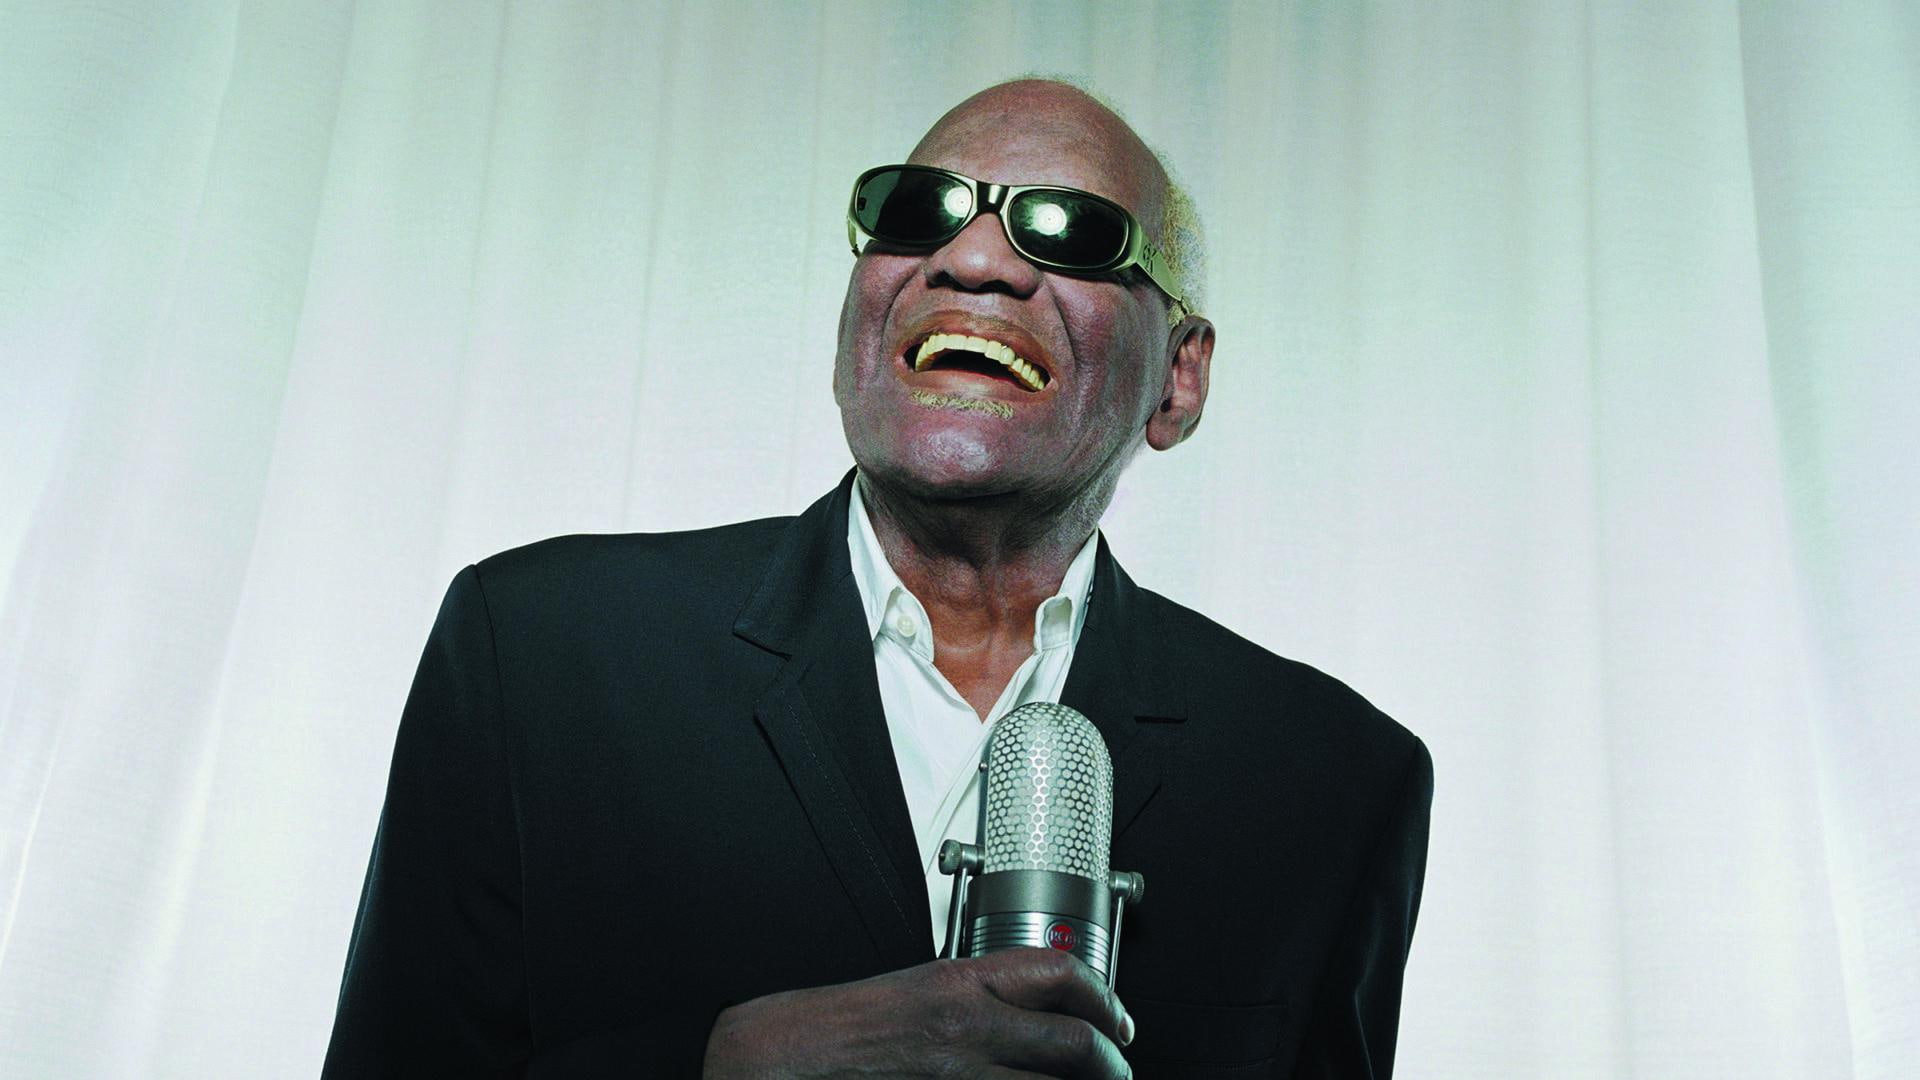 ray charles, musician, microphone, smiling